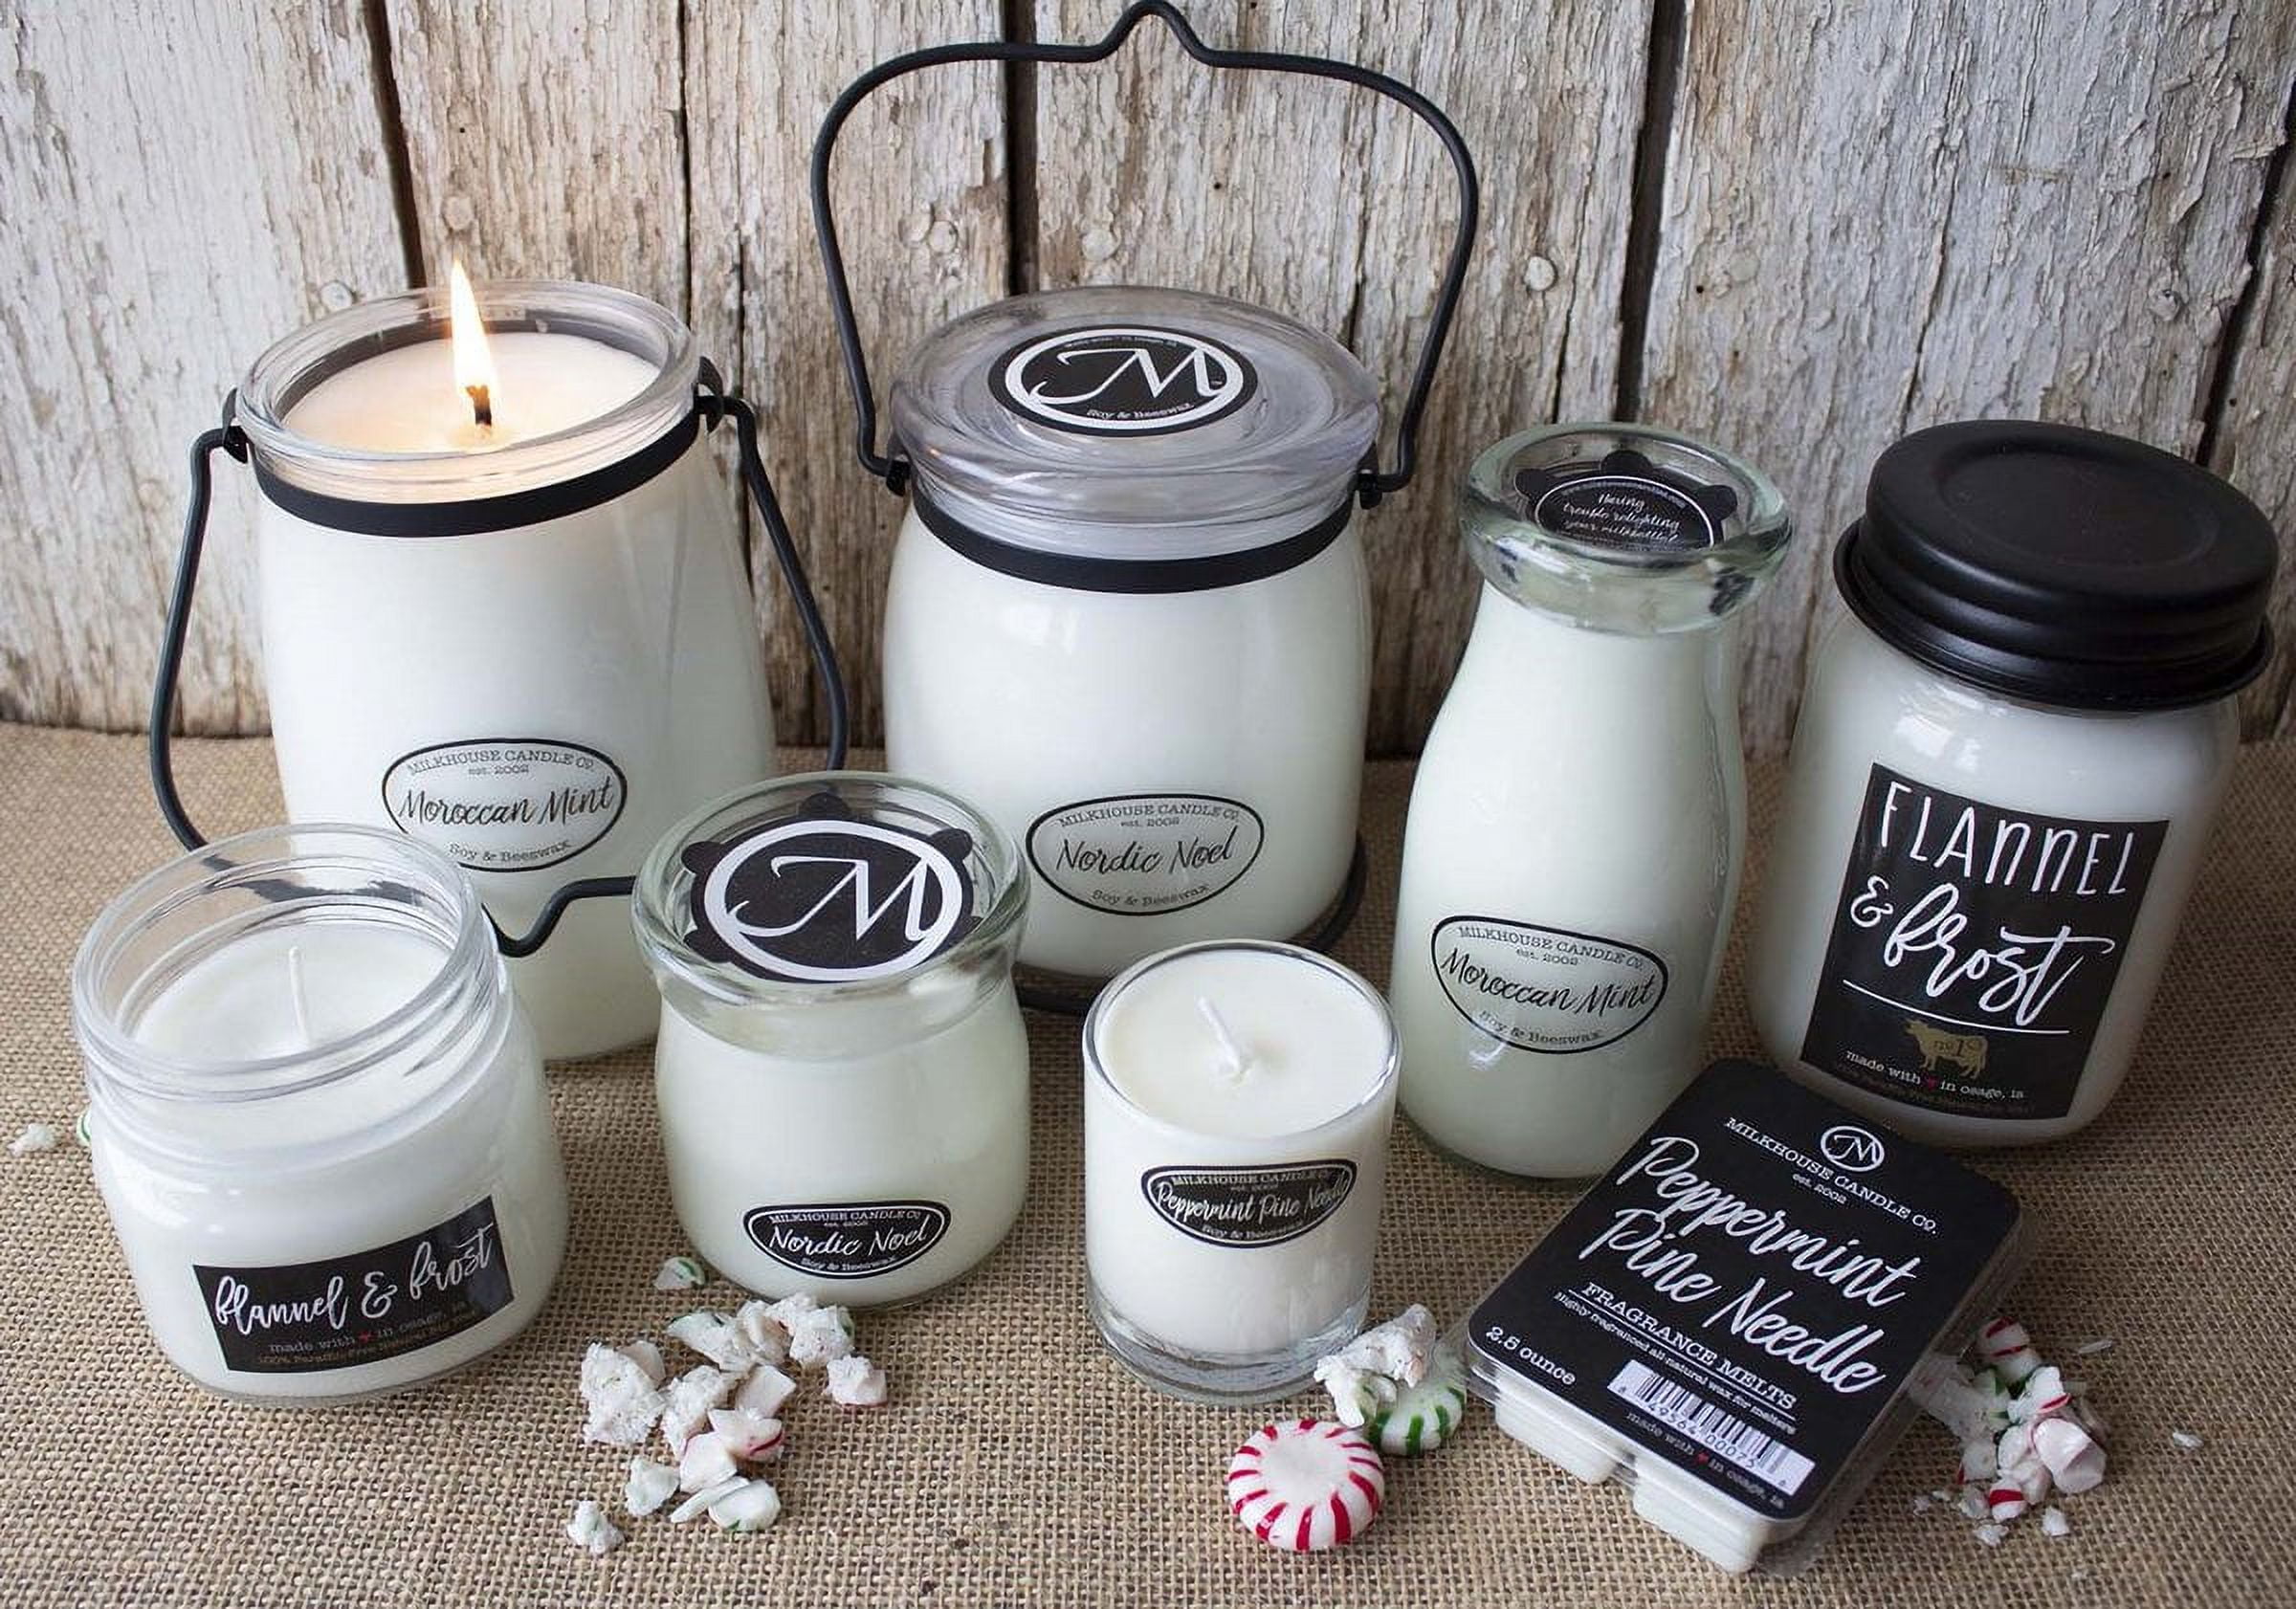 Milkhouse Candle Co.